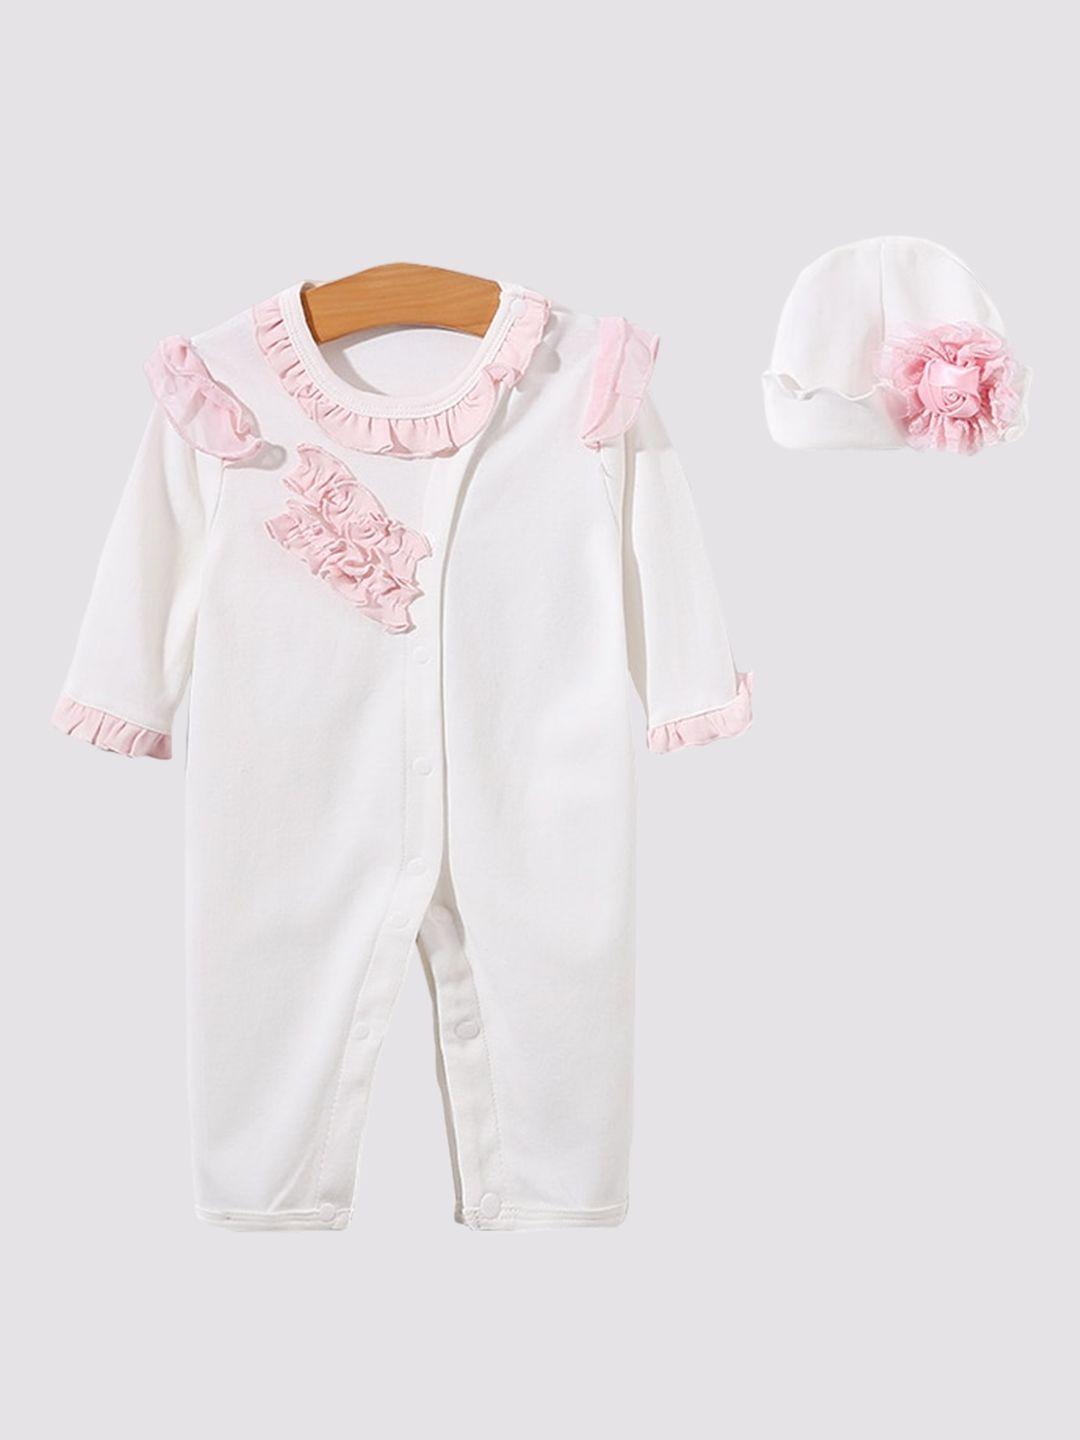 StyleCast Infant Girls White Self Design Cotton Rompers